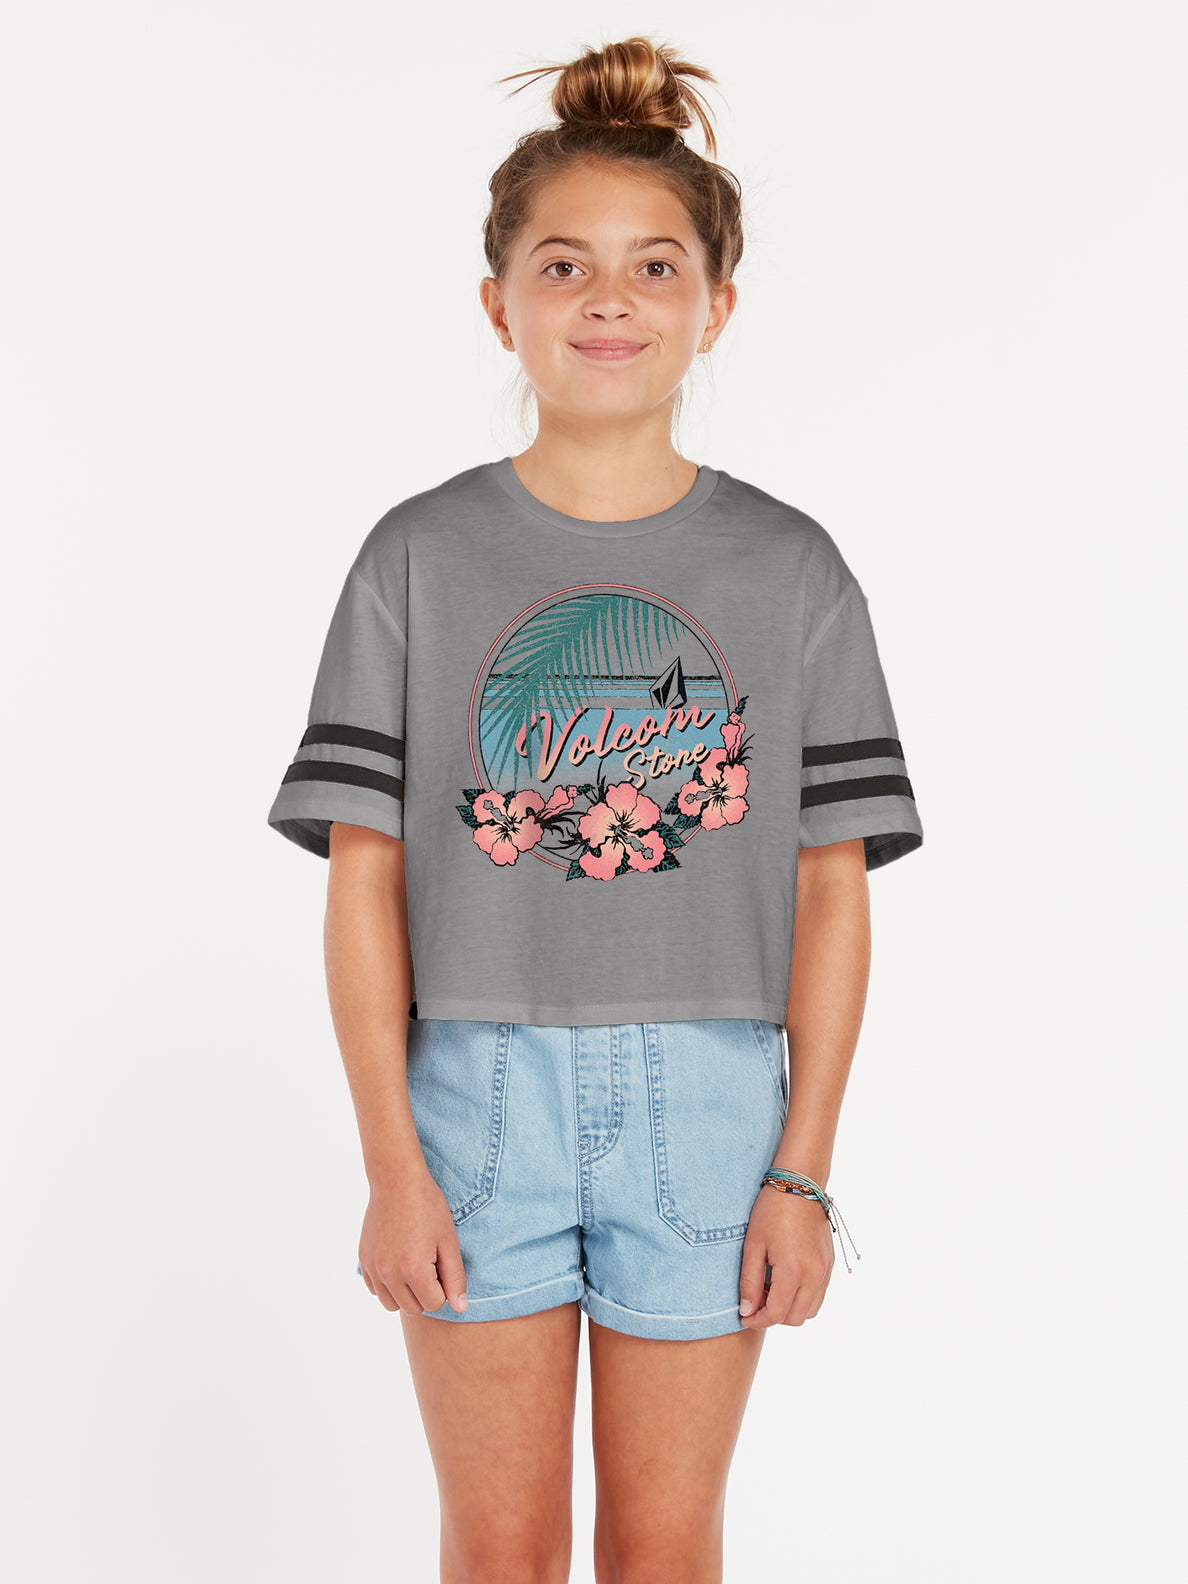 VOLCOM TRULY STOKED YOUTH TEE HEATHER GREY